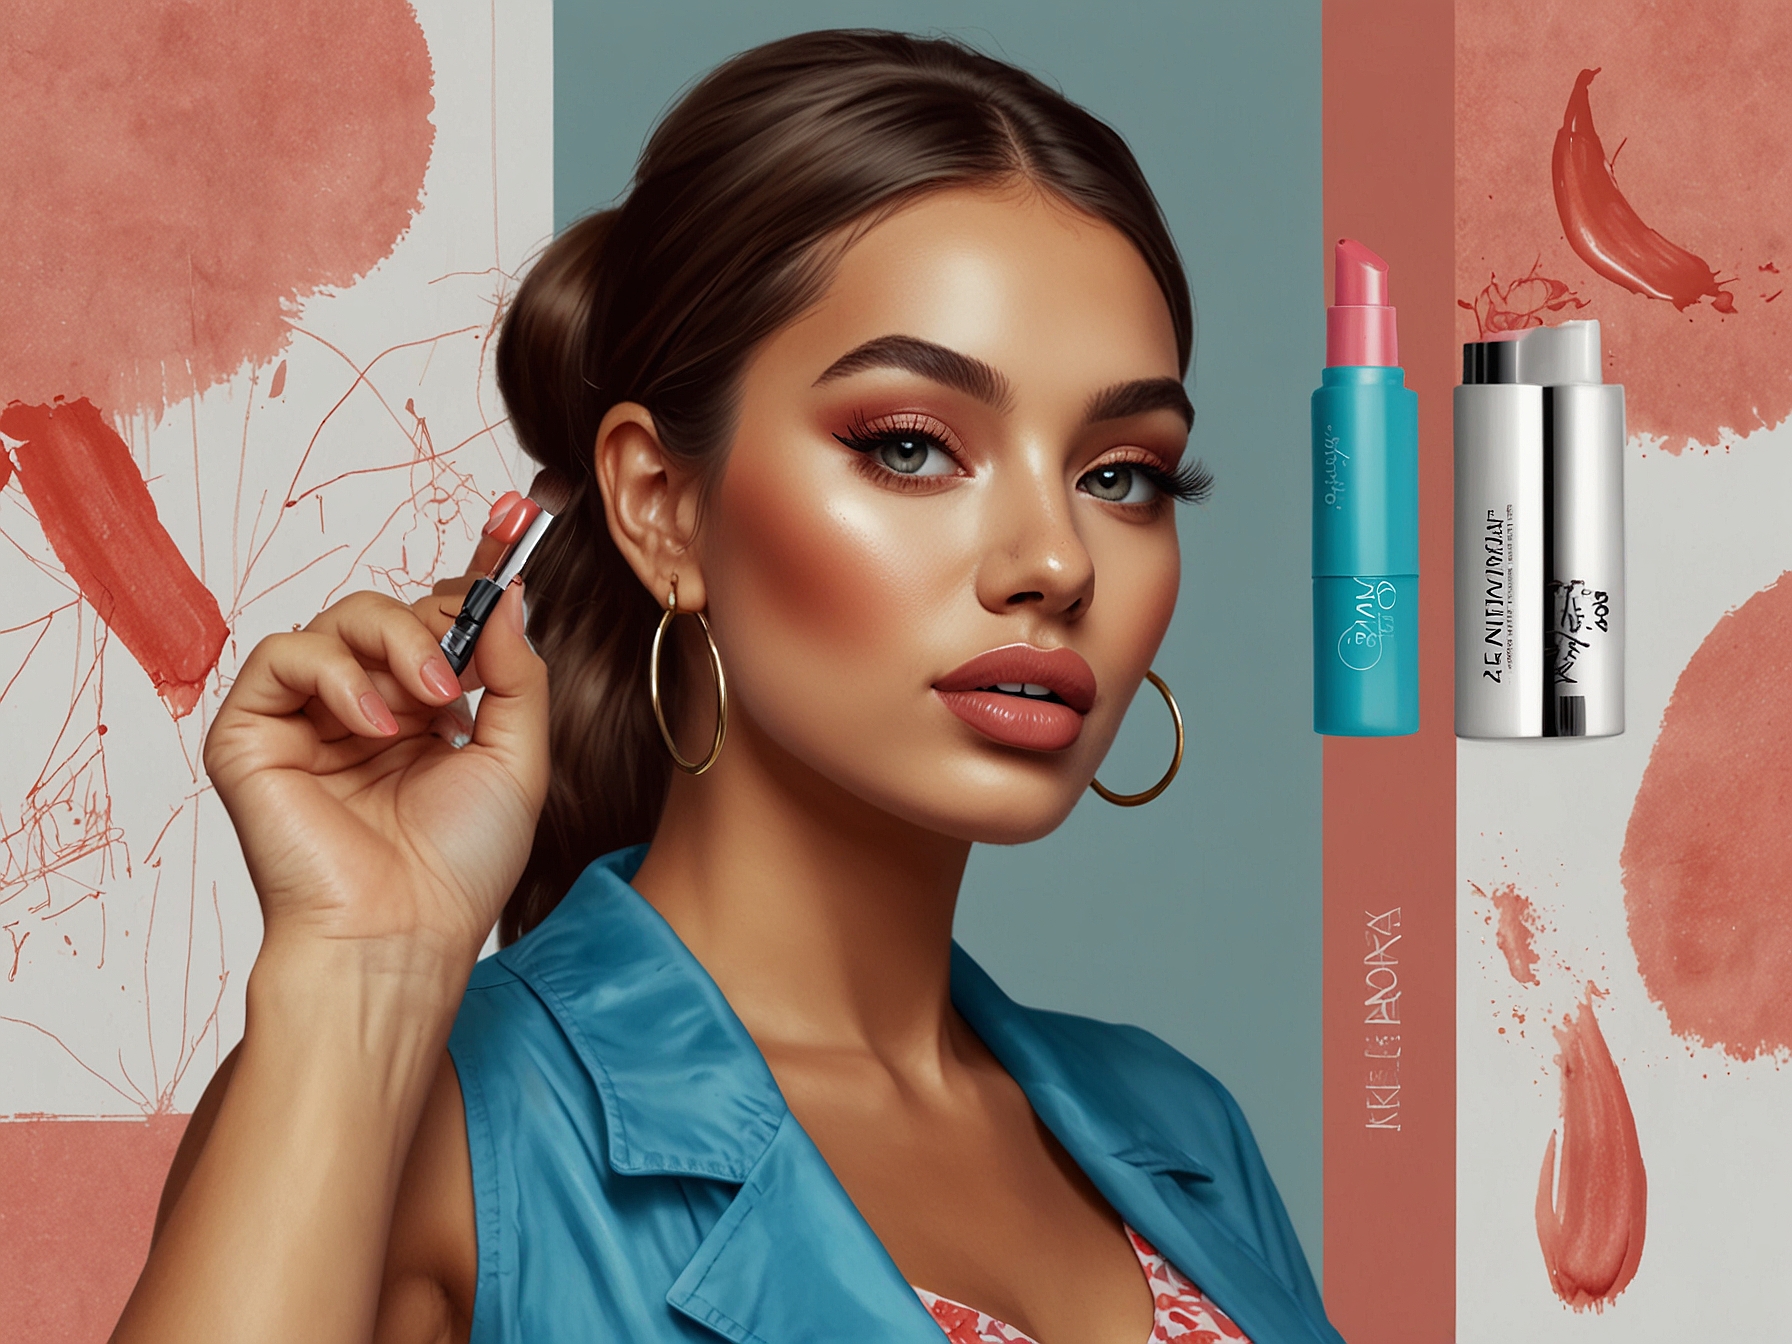 A beauty blogger applying Primark's lip product, showcasing its smooth application and vibrant color payoff that rivals more expensive brands.